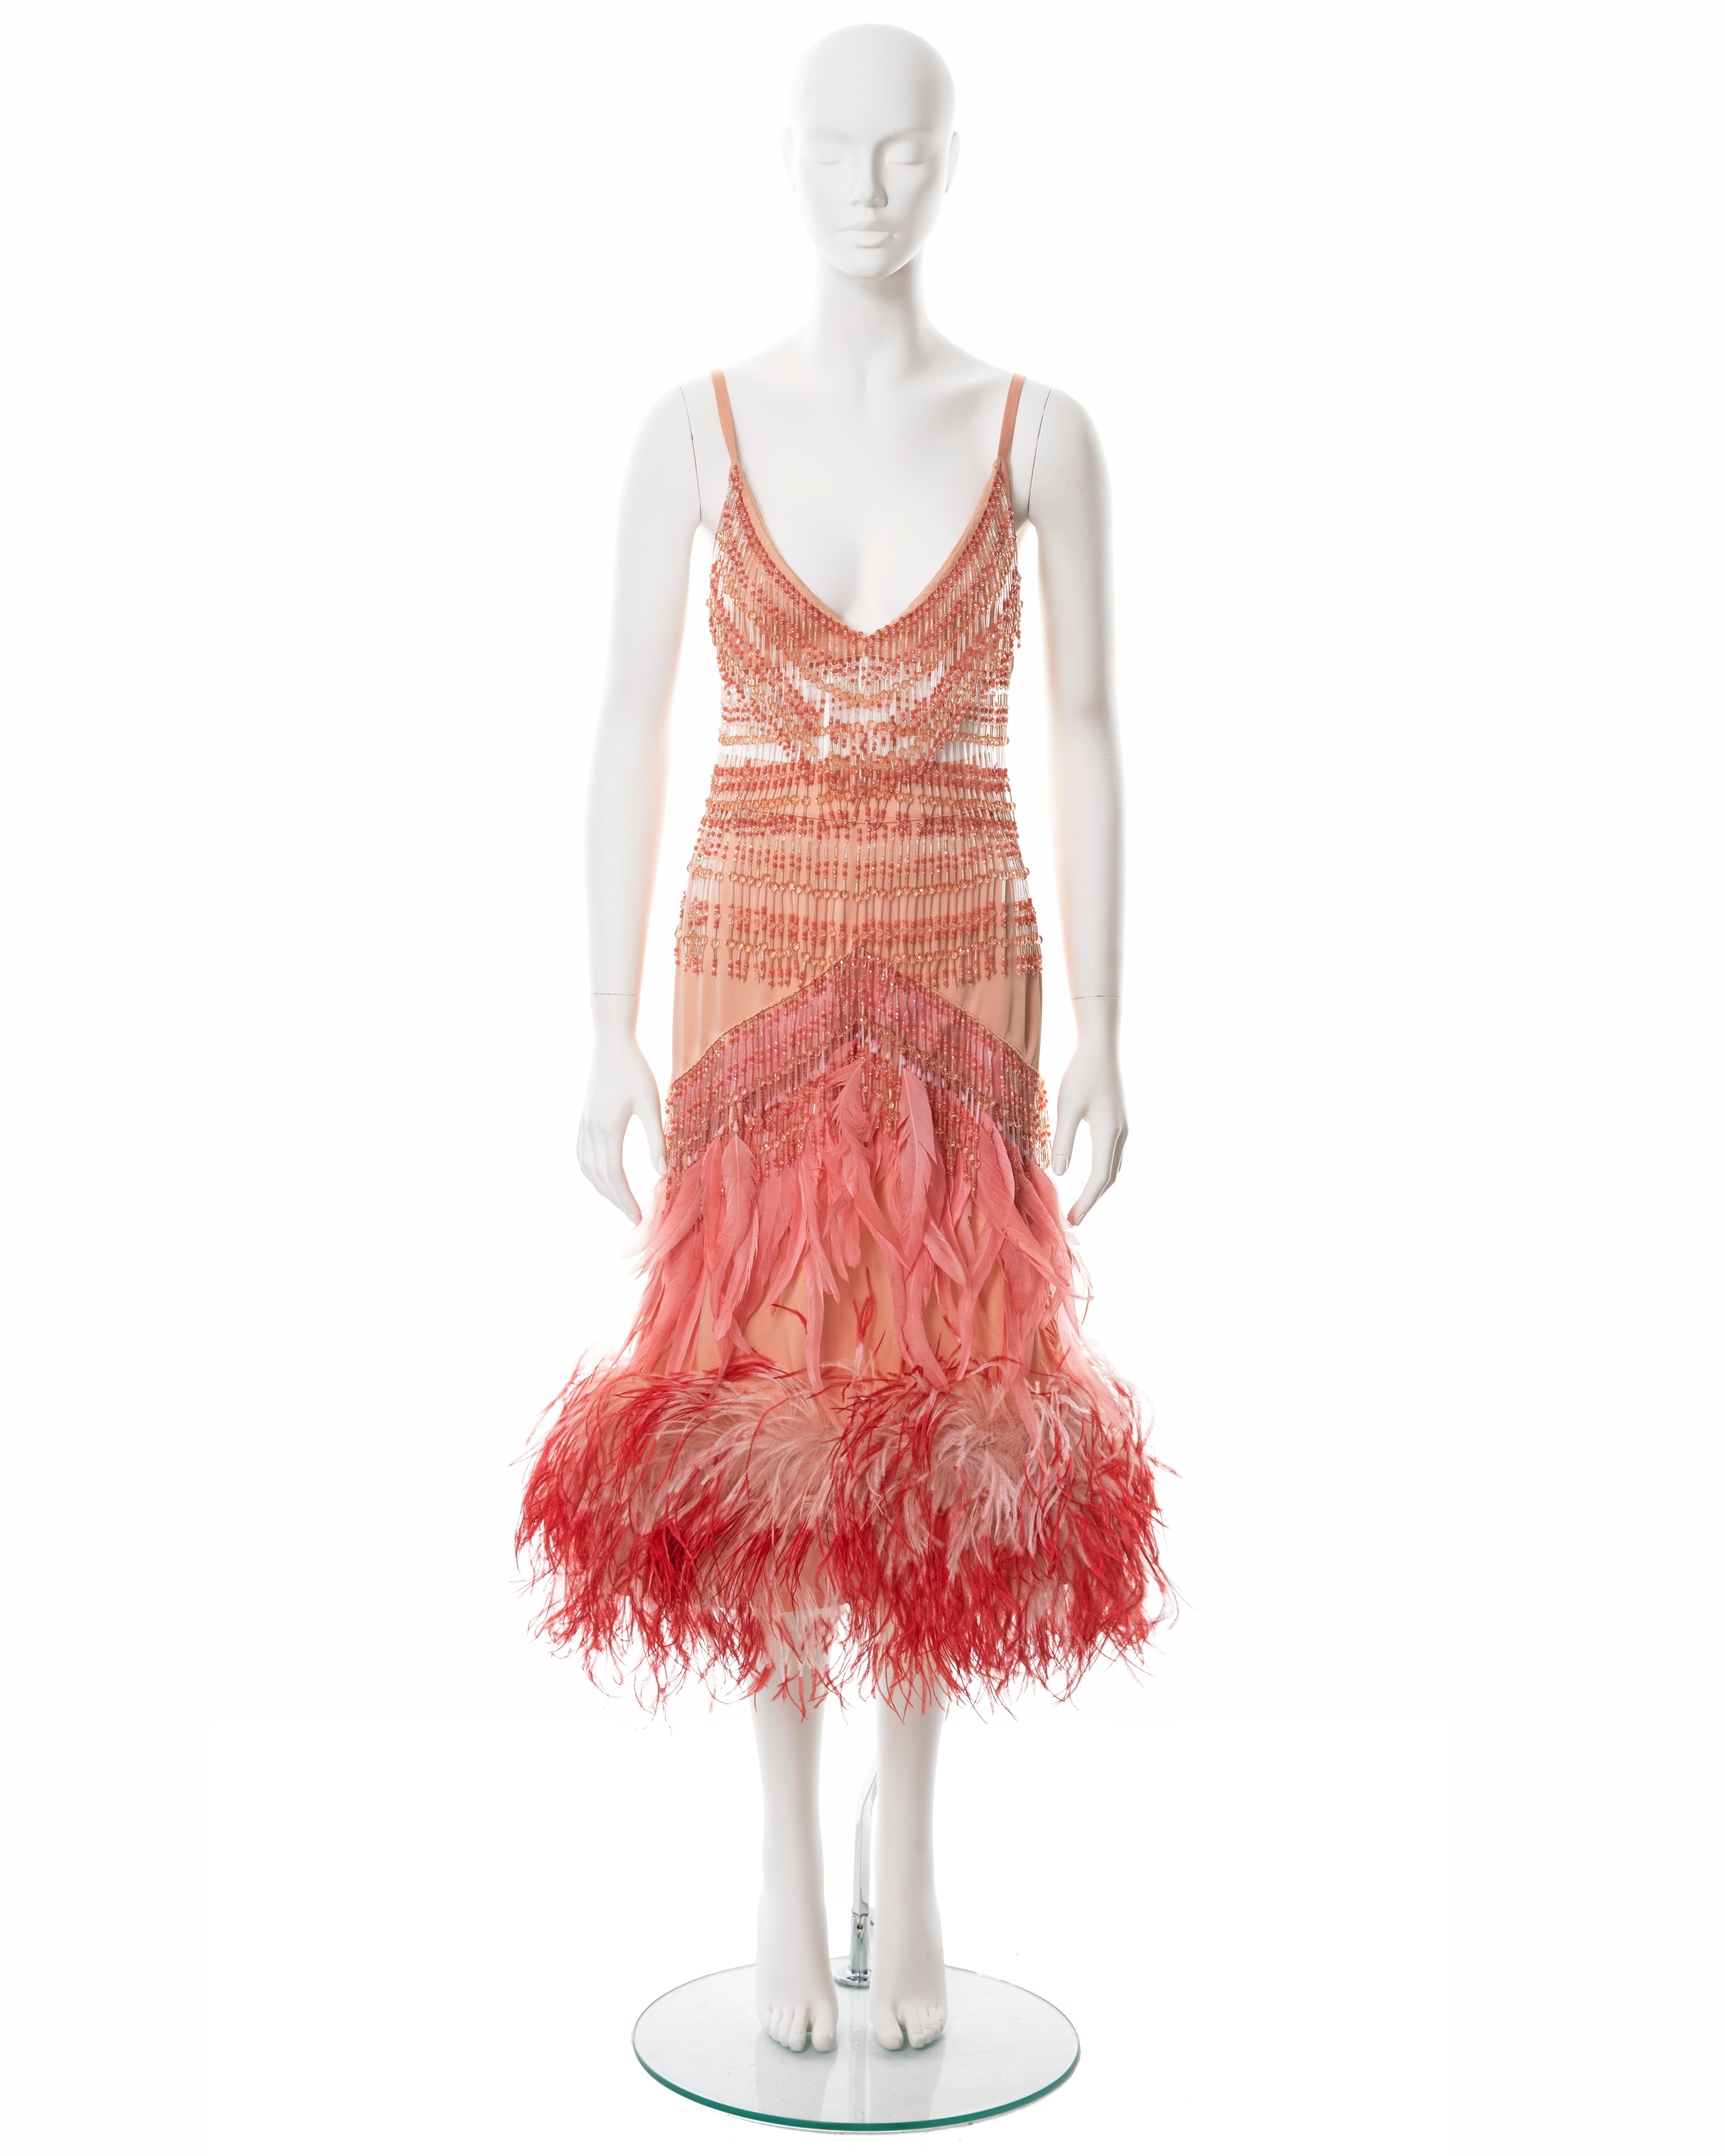 ▪ Prada evening bra and skirt ensemble 
▪ Designed by Miuccia Prada
▪ Sold by One of a Kind Archive
▪ Fall-Winter 2017
▪ Constructed from salmon silk 
▪ Beaded fringe trim 
▪ Pink ostrich and turkey feather embellishments 
▪ Marked size '38', Bust: